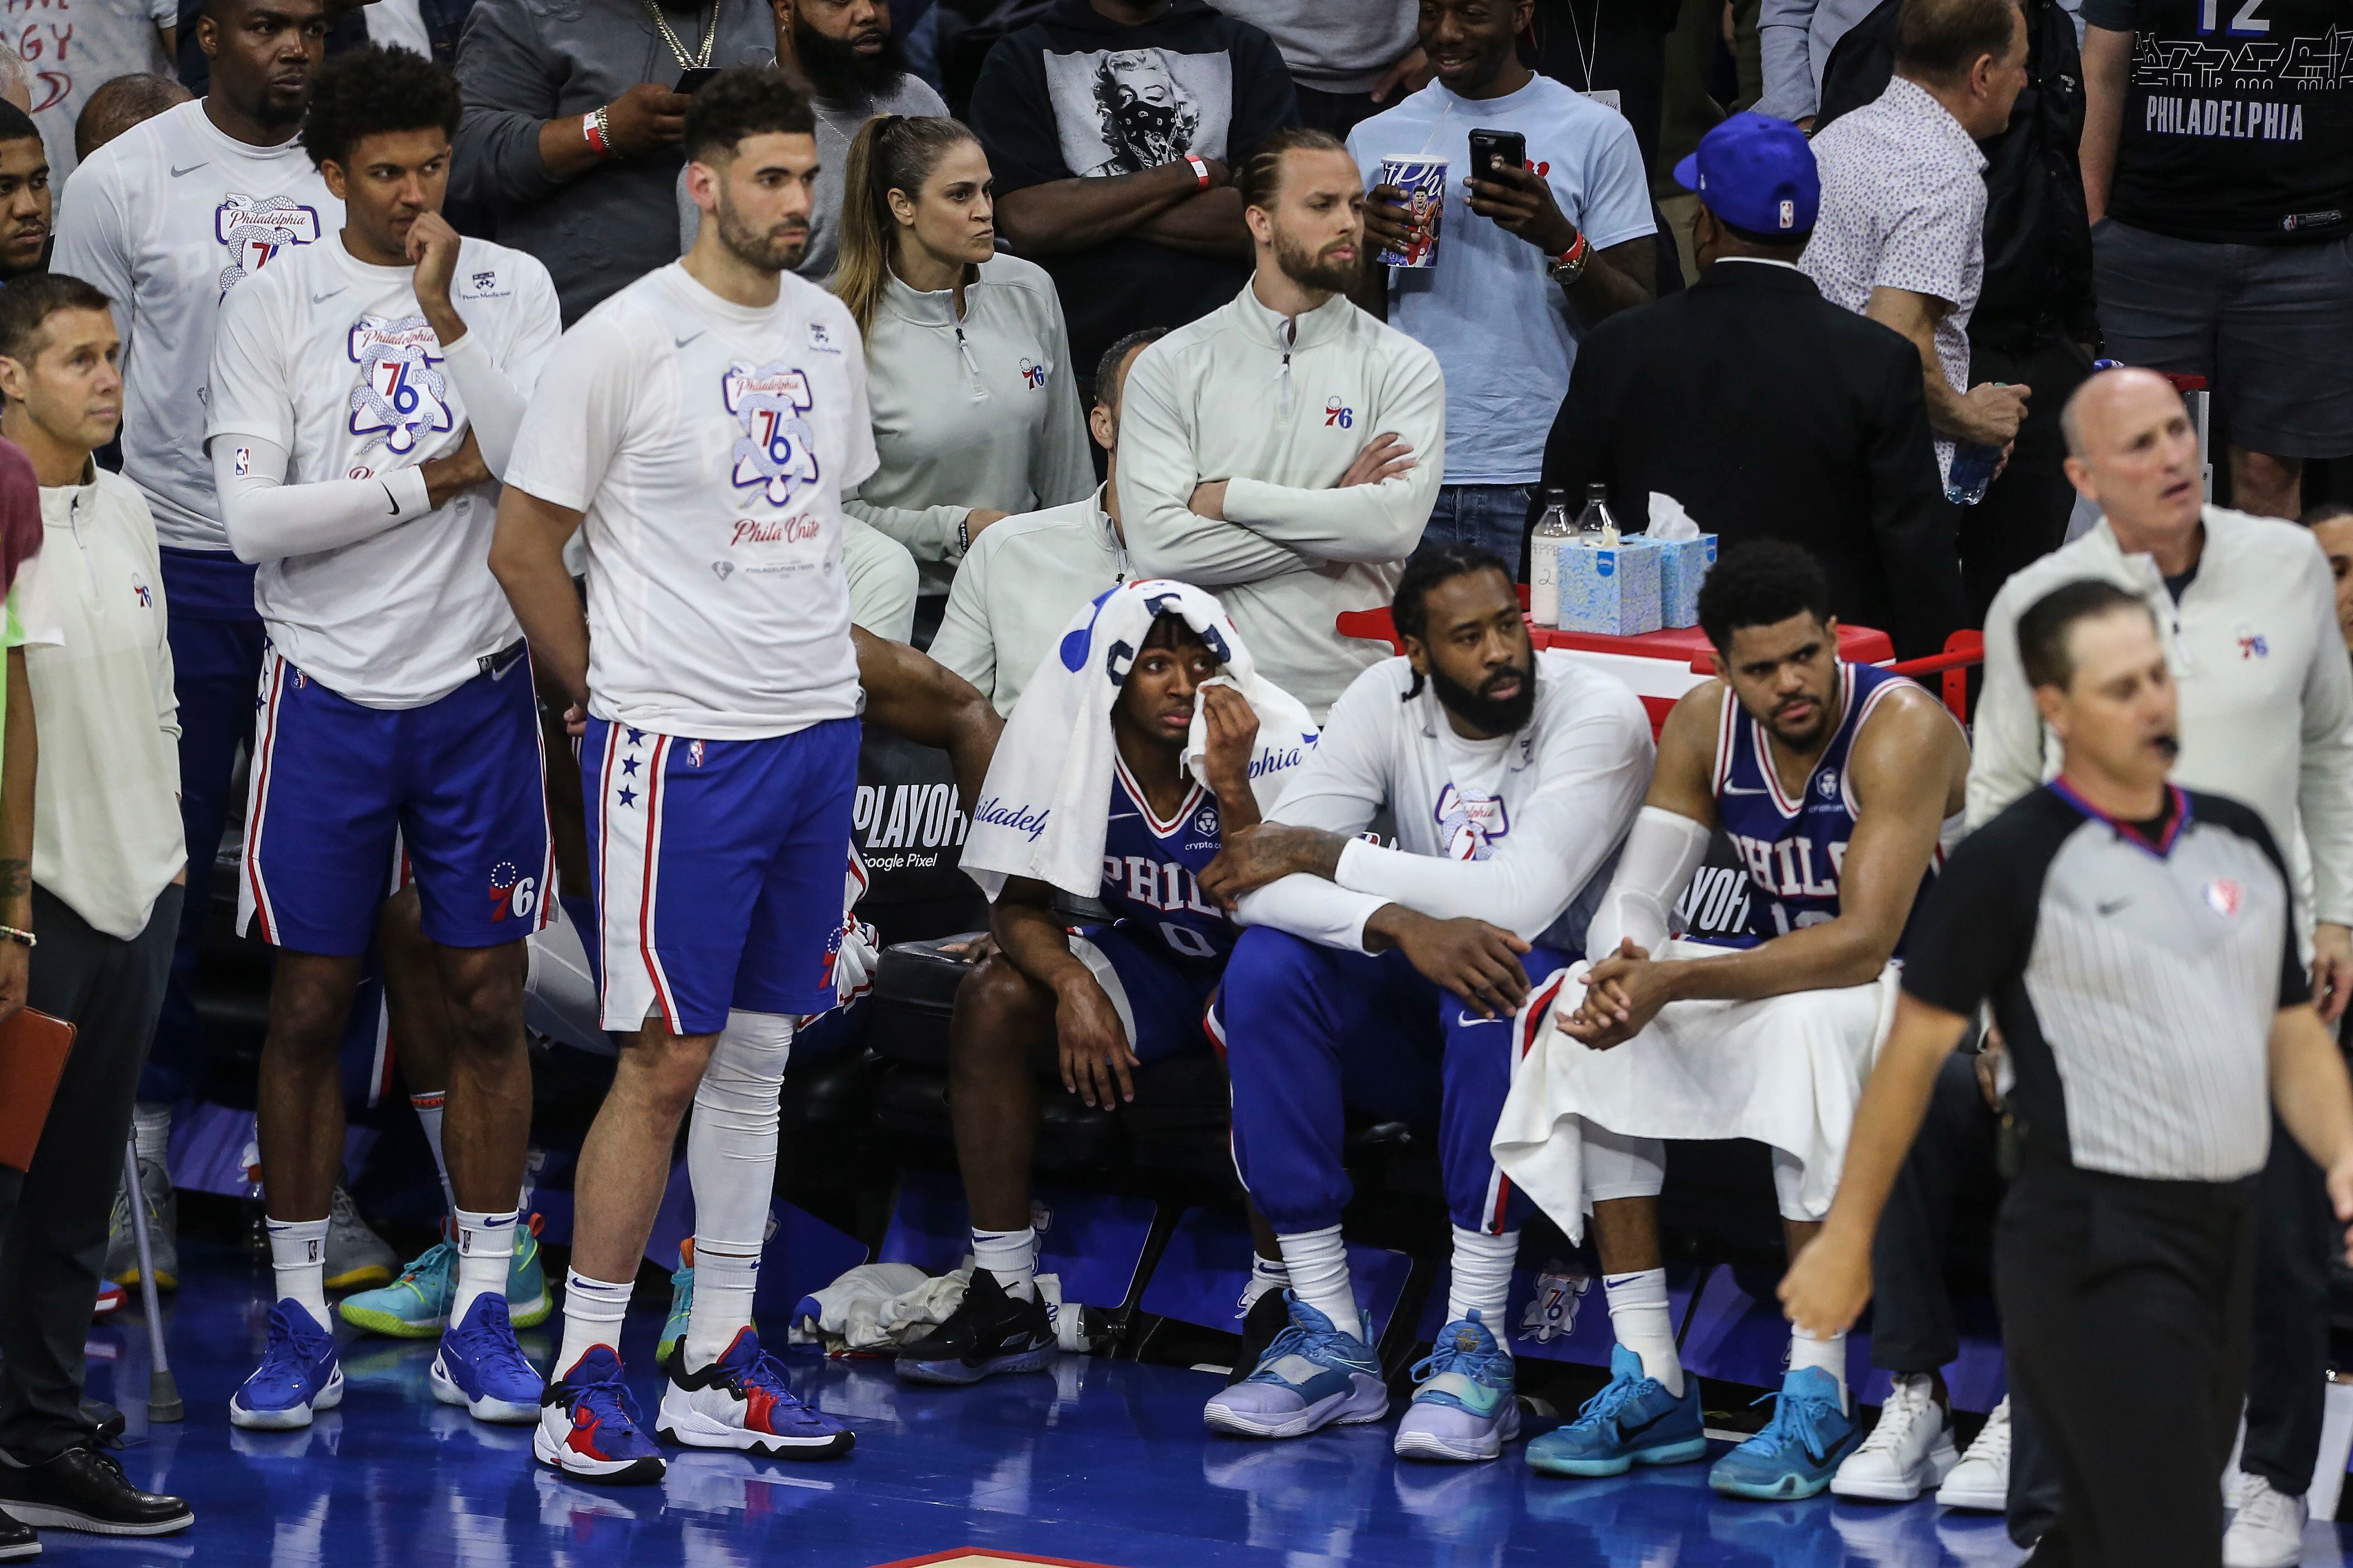 A tumultuous few weeks for Sixers, a timely All-Star break, and